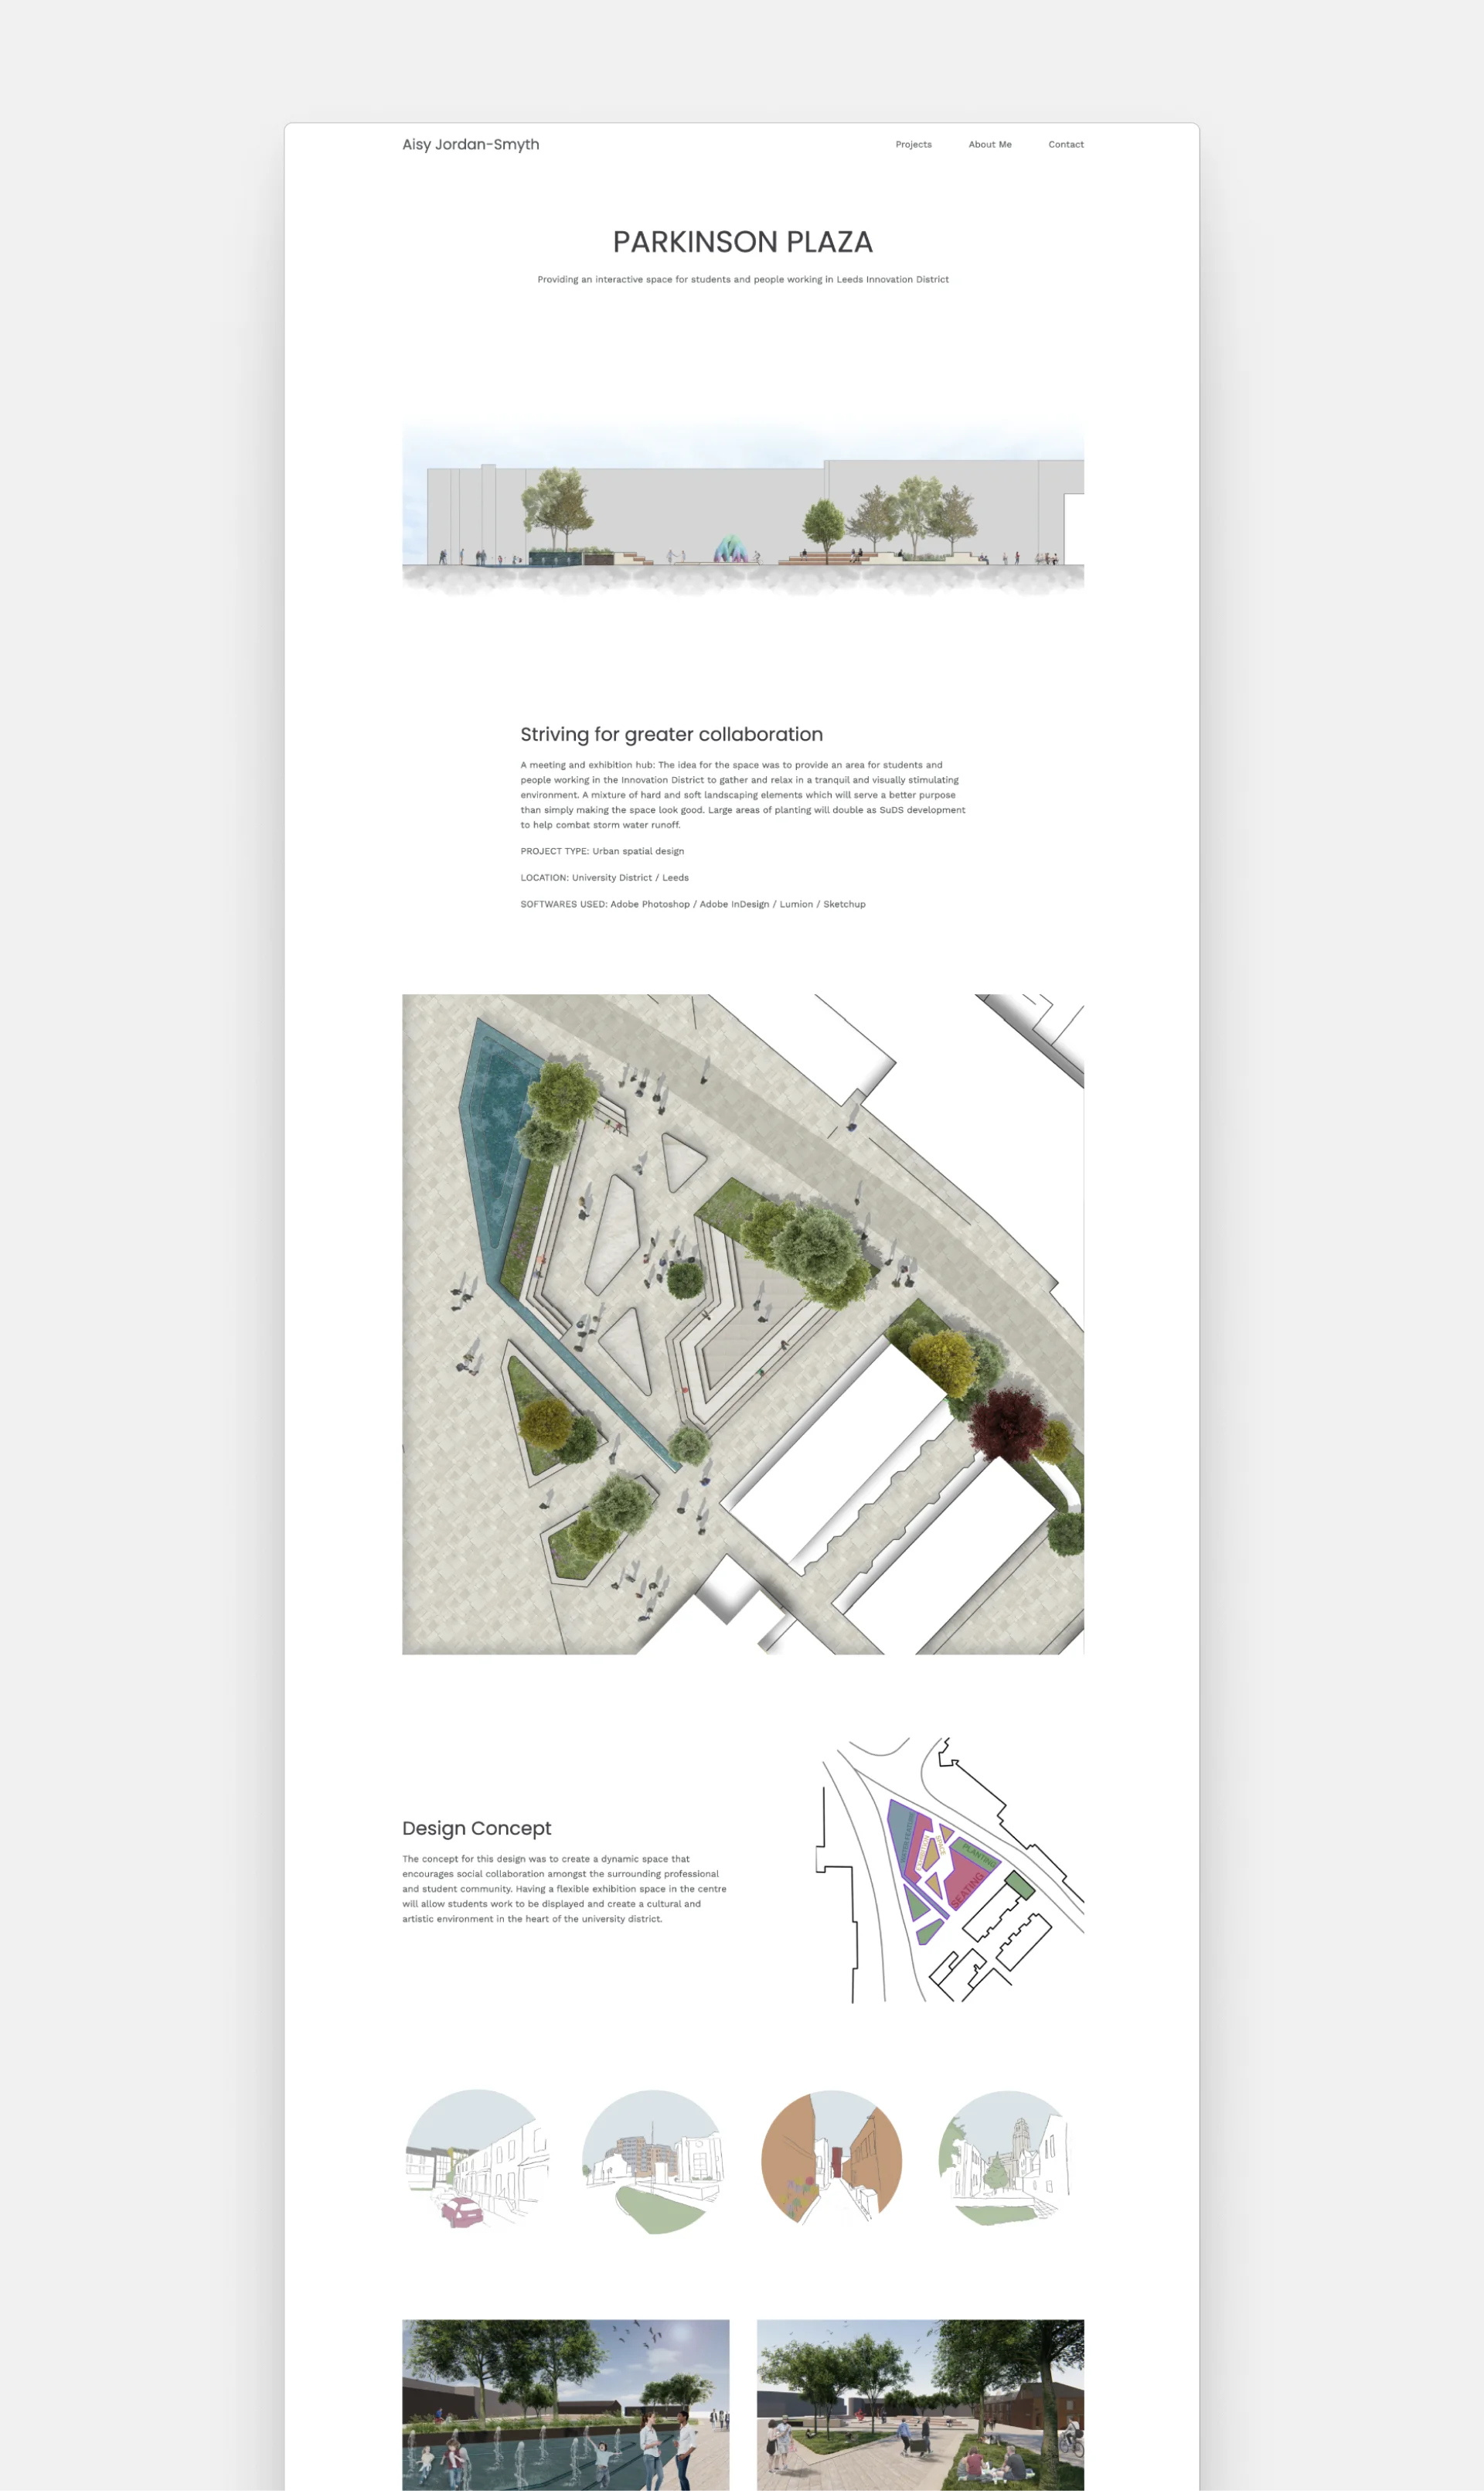 Screenshot of Aisy Jordan-Smyth's project page, which she created with Archifolio's Palazzo template. 